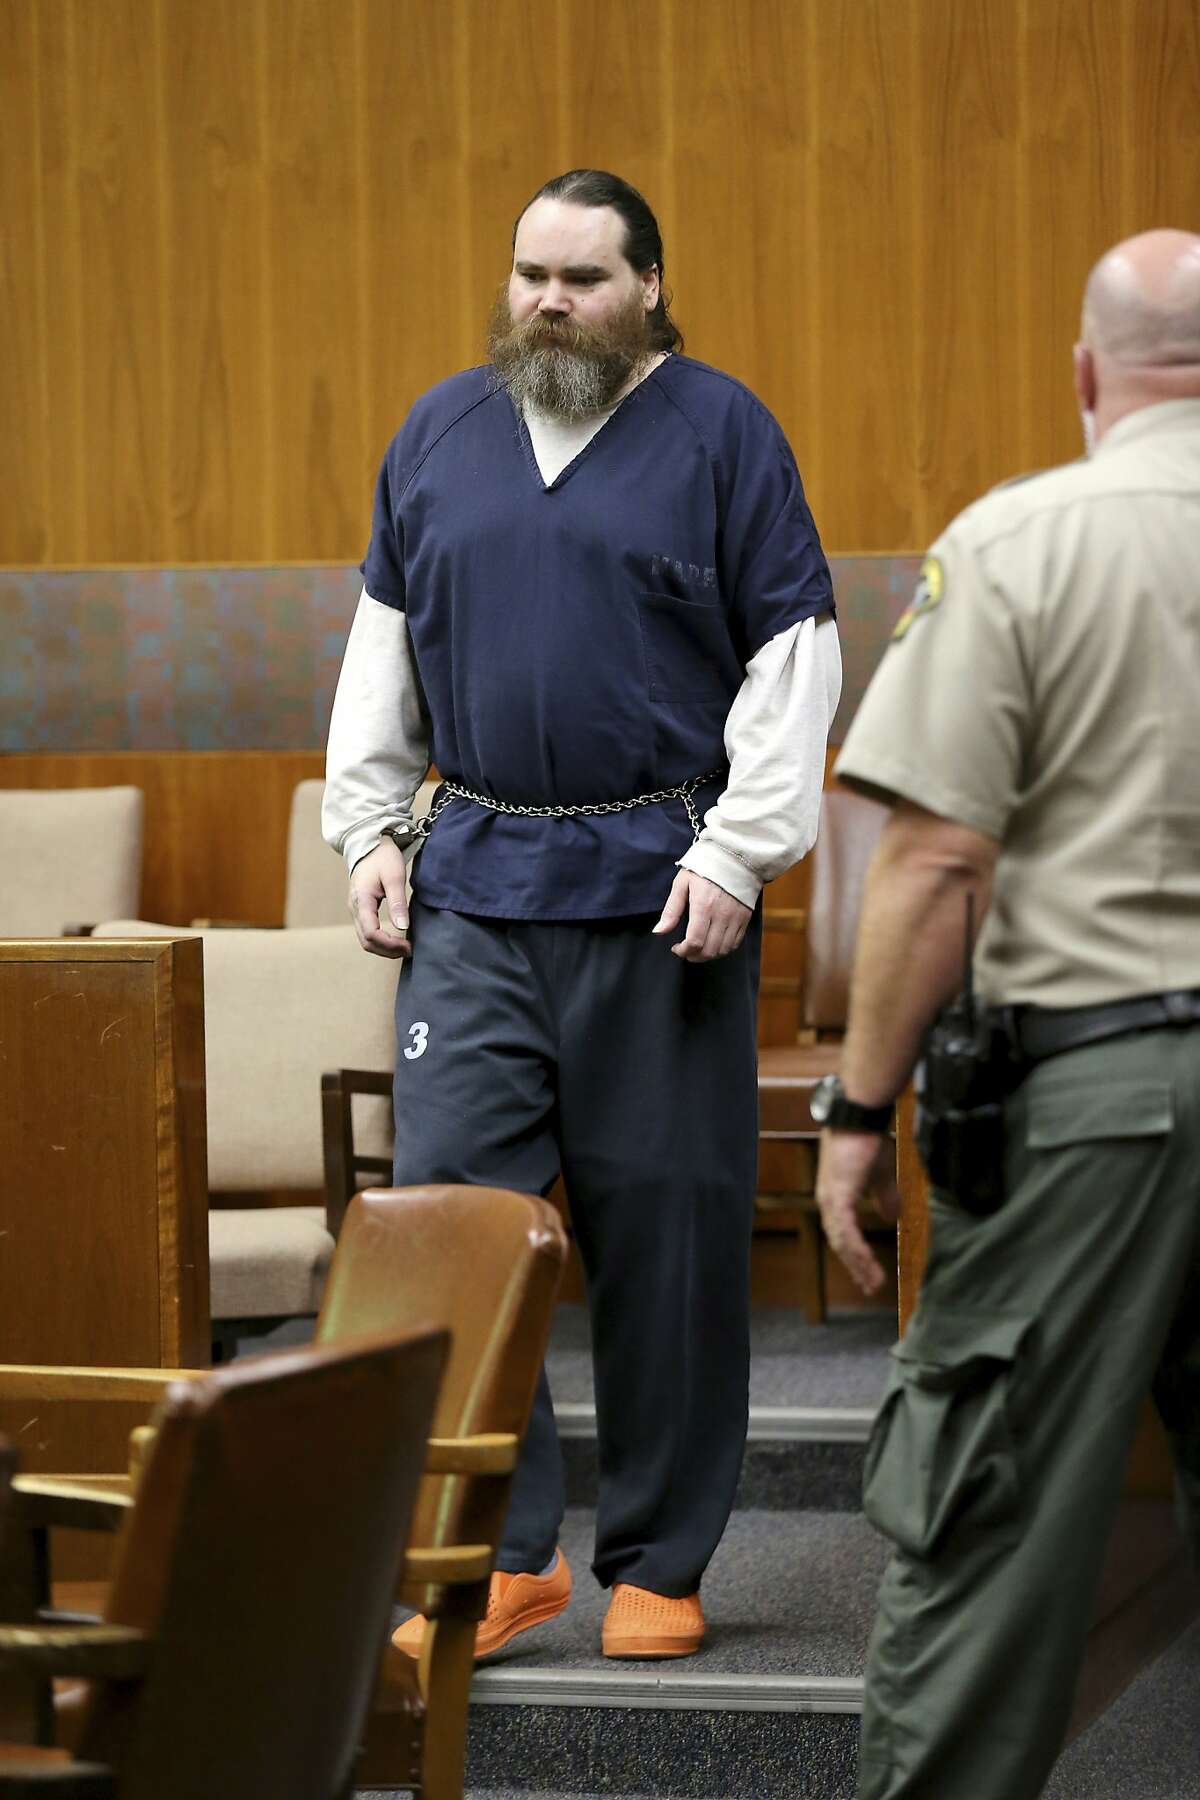 Shaun Gallon is escorted into a courtroom for a sentencing hearing, Monday, July 15, 2019, in Santa Rosa, Calif. Gallon sentenced to life in prison for killing an engaged couple from Ohio while they were camping on a Northern California beach in 2004. (Beth Schlanker/The Press Democrat via AP)